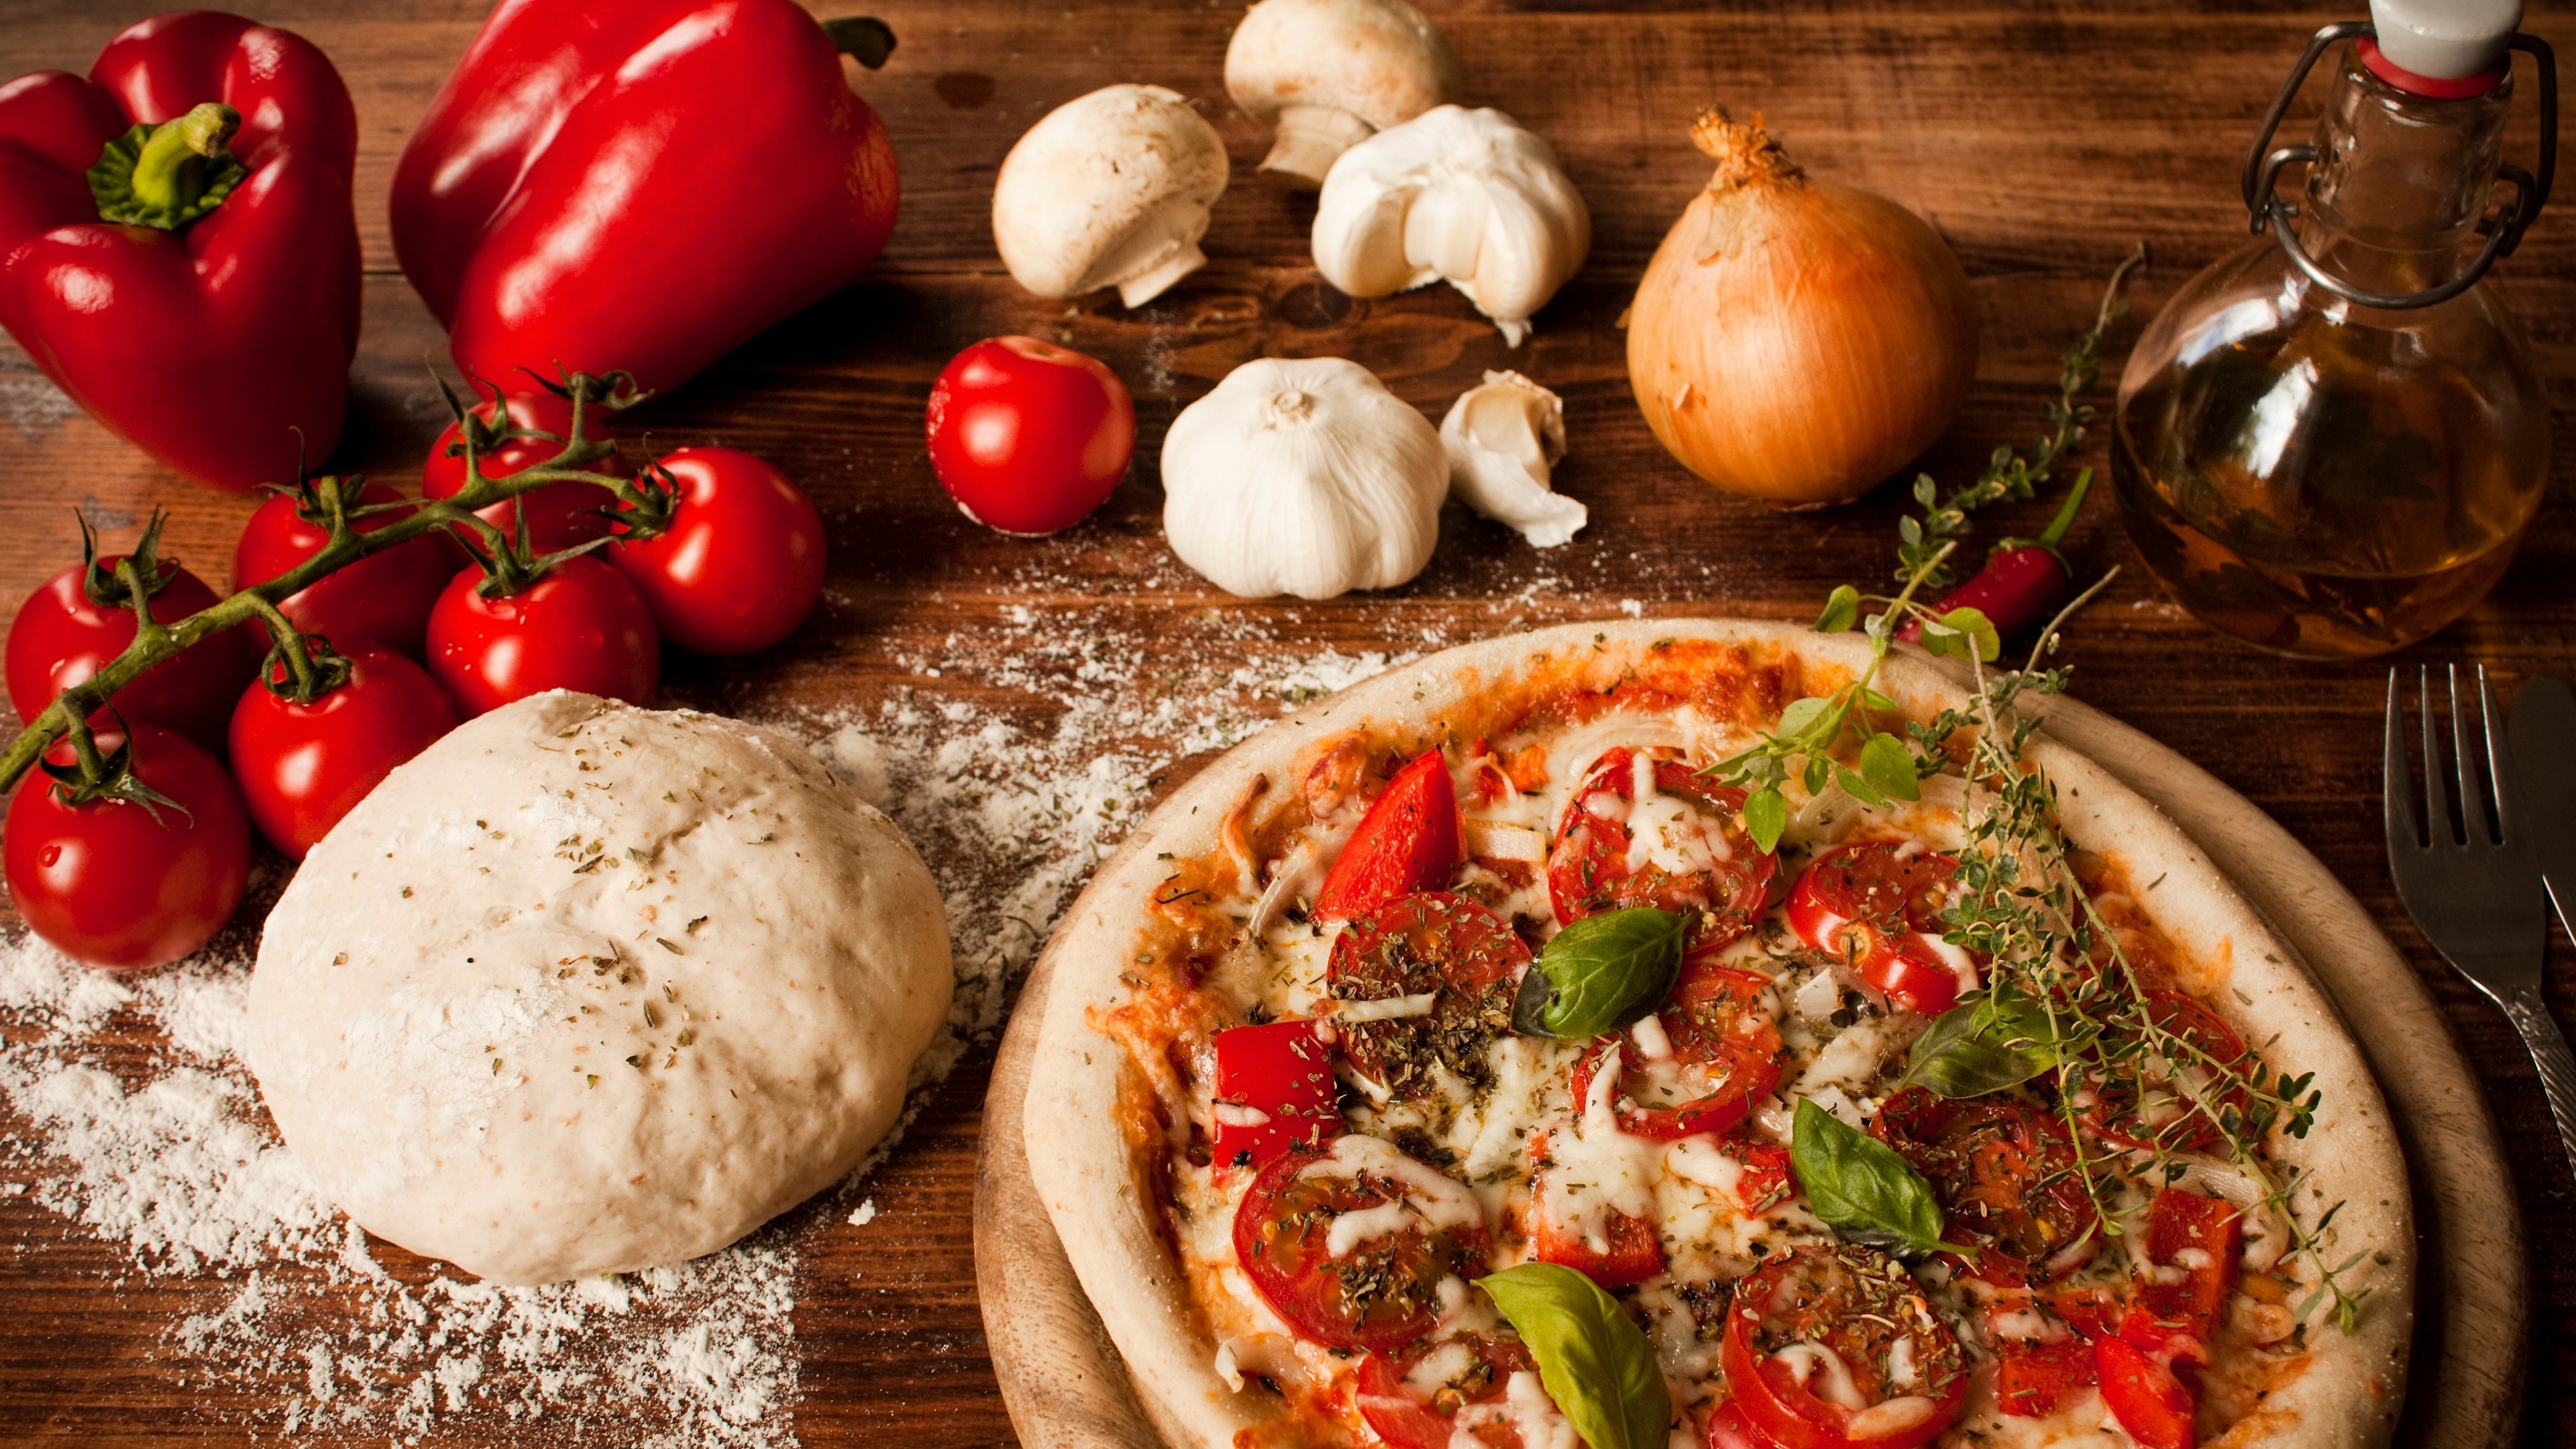 Pizza Food Vegetables Onion Flour Tomatoes Wooden Surface 3840x2160